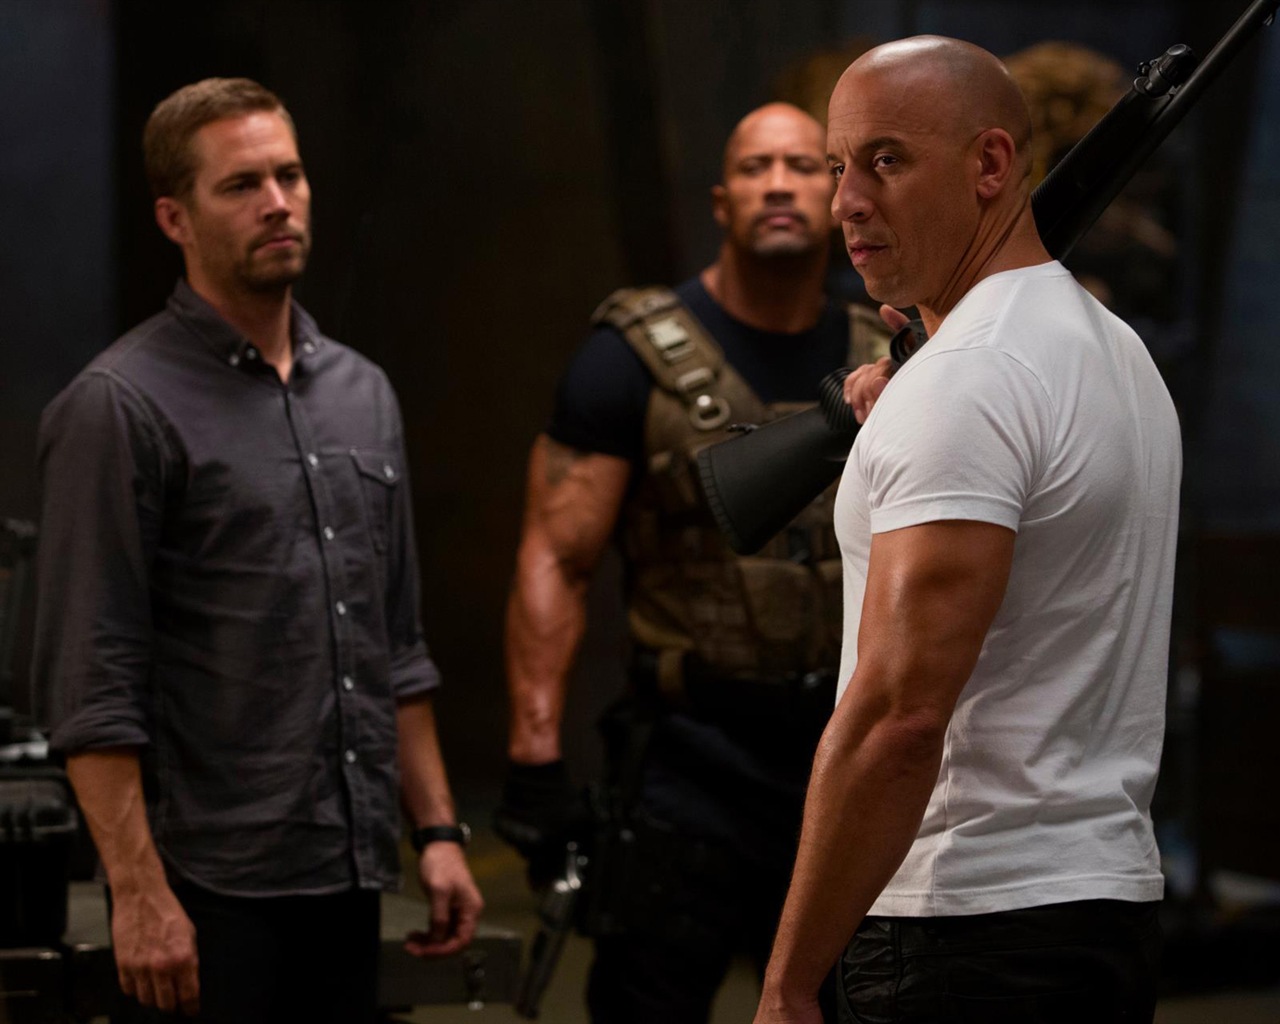 Fast And Furious 6 HD movie wallpapers #5 - 1280x1024